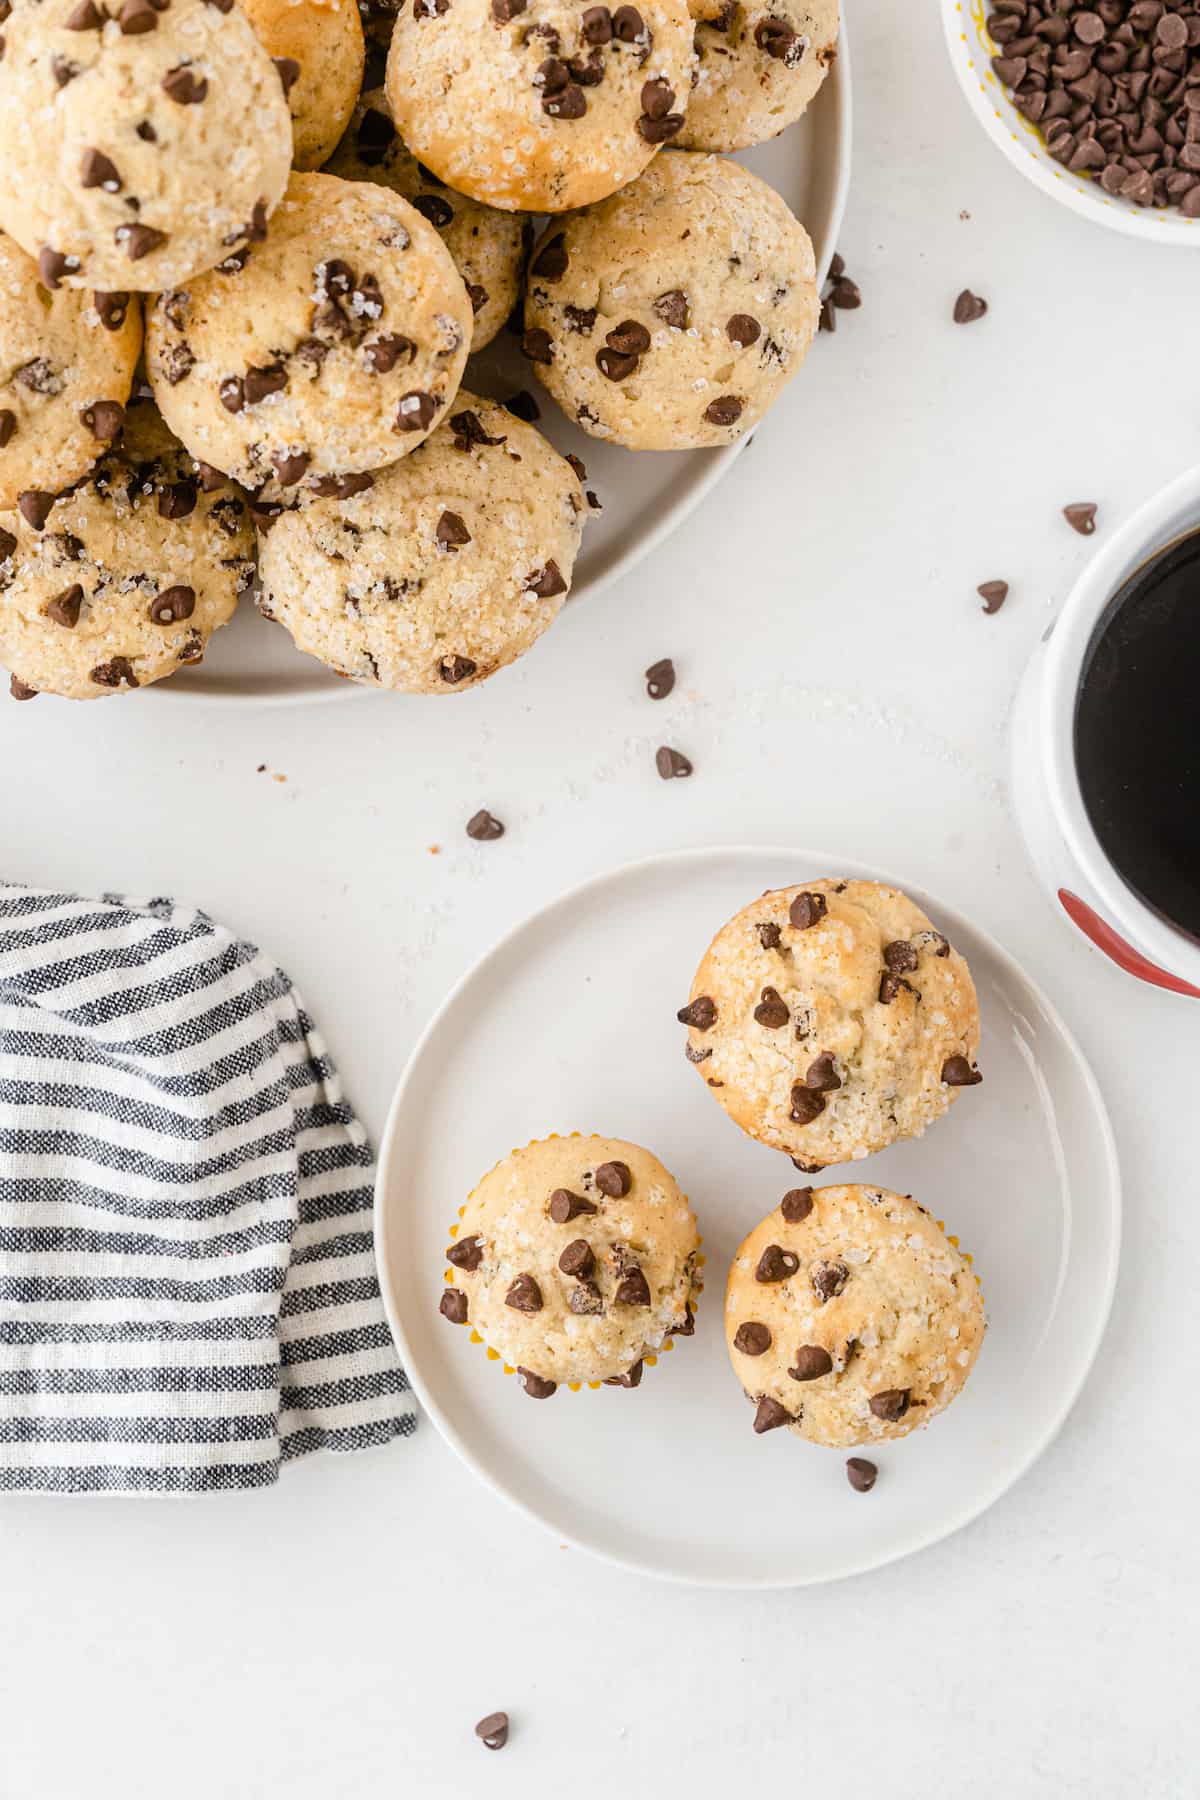 Mini chocolate chip muffins piled on a white plate on a white table. with coffee and muffins on a plate.